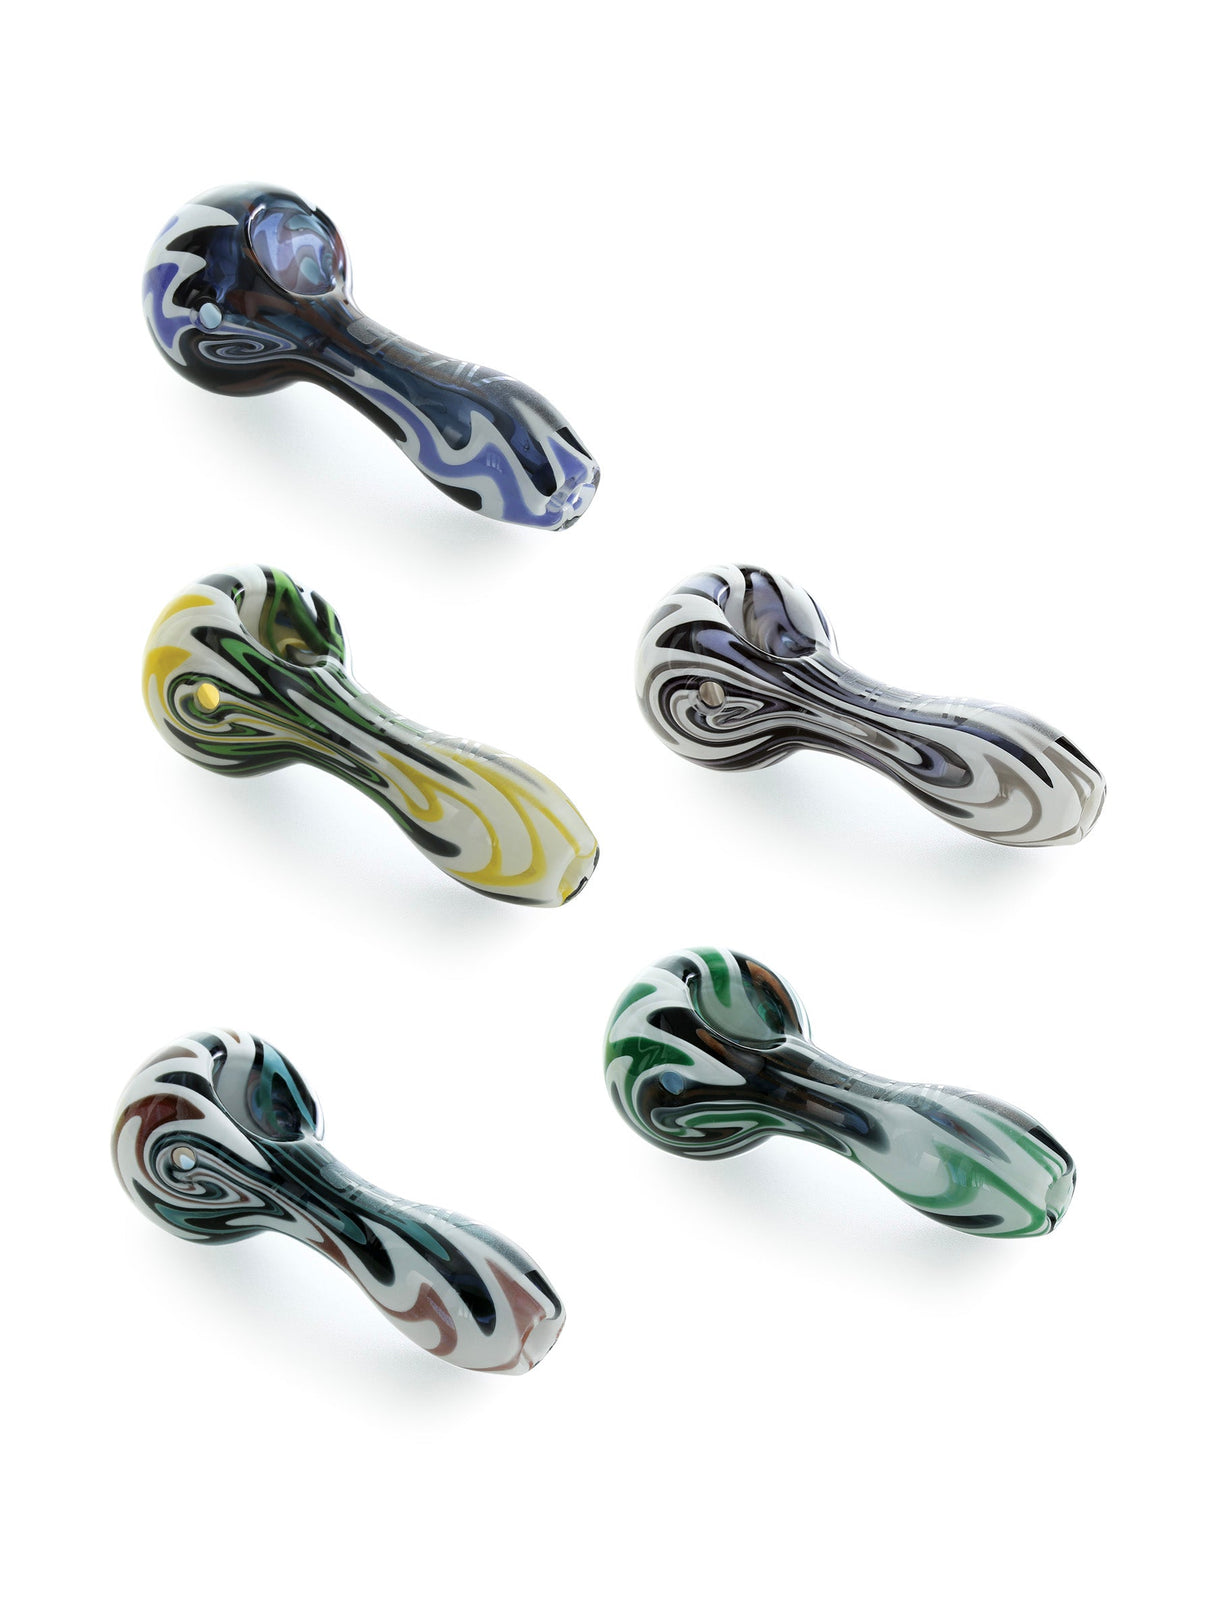 Assorted GRAV Wig Wag Spoon Hand Pipes in various colors with thick borosilicate glass